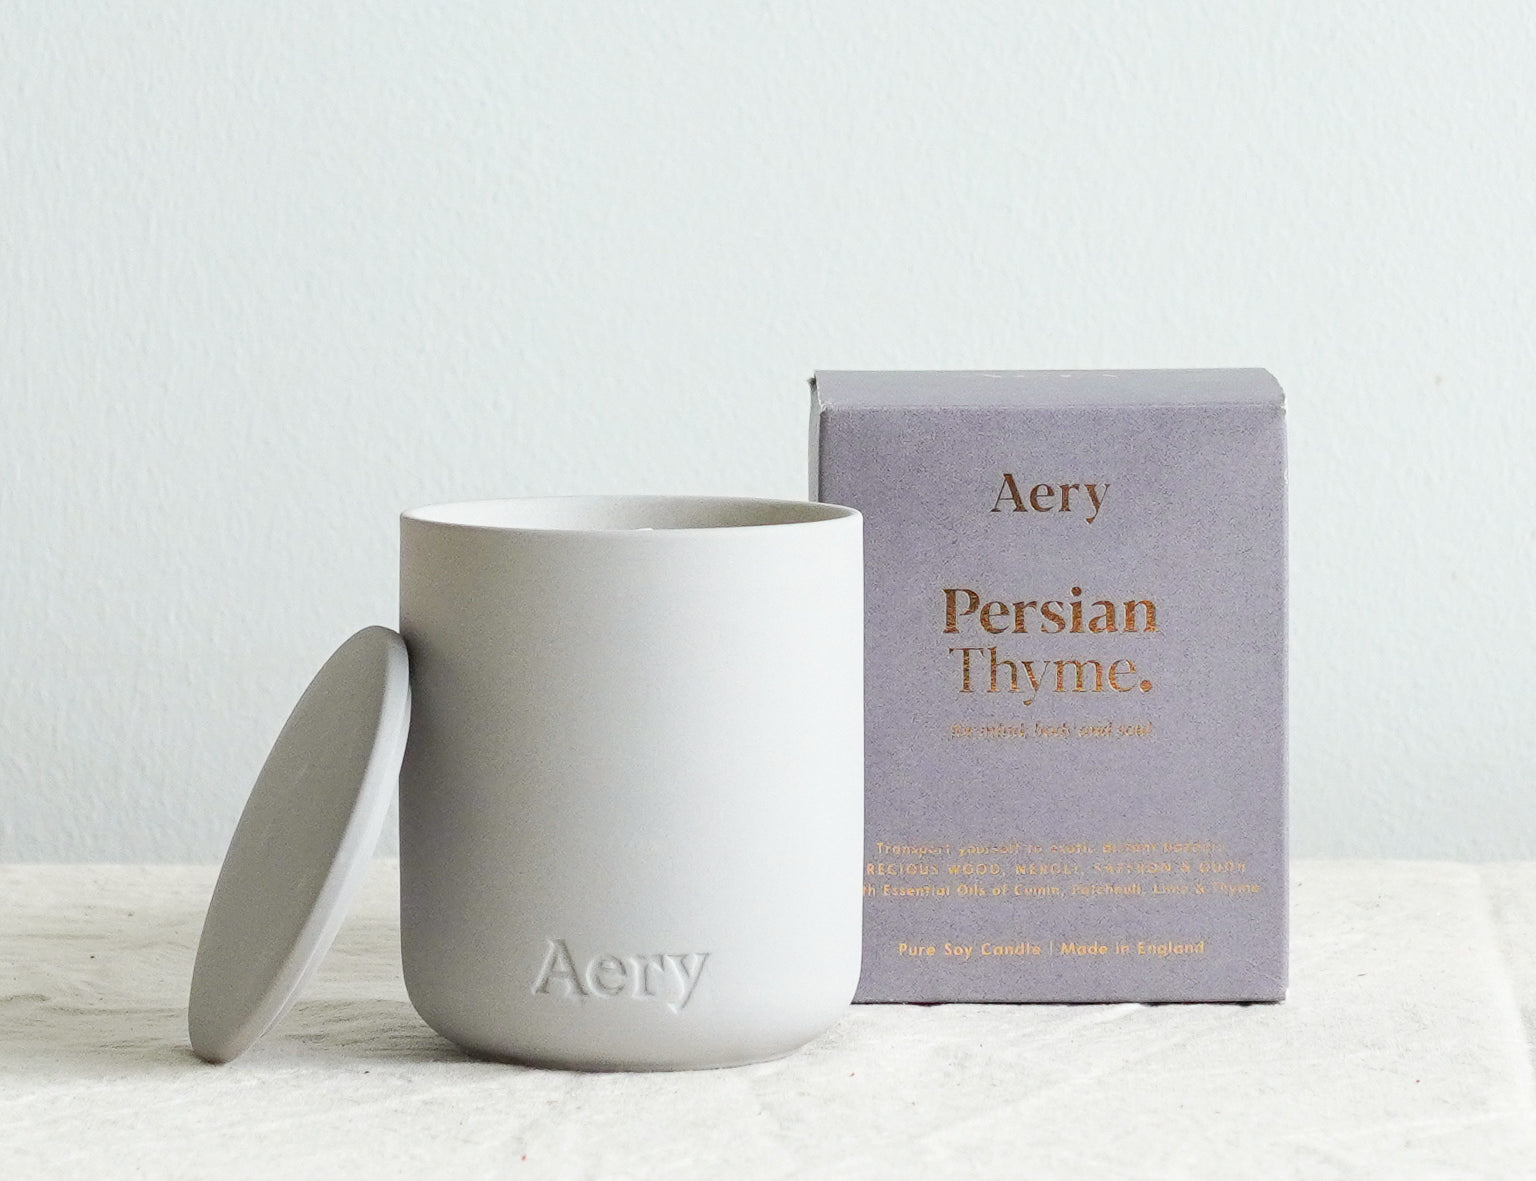 Aery Living candle in ceramic vessel  - Persian Thyme 280g